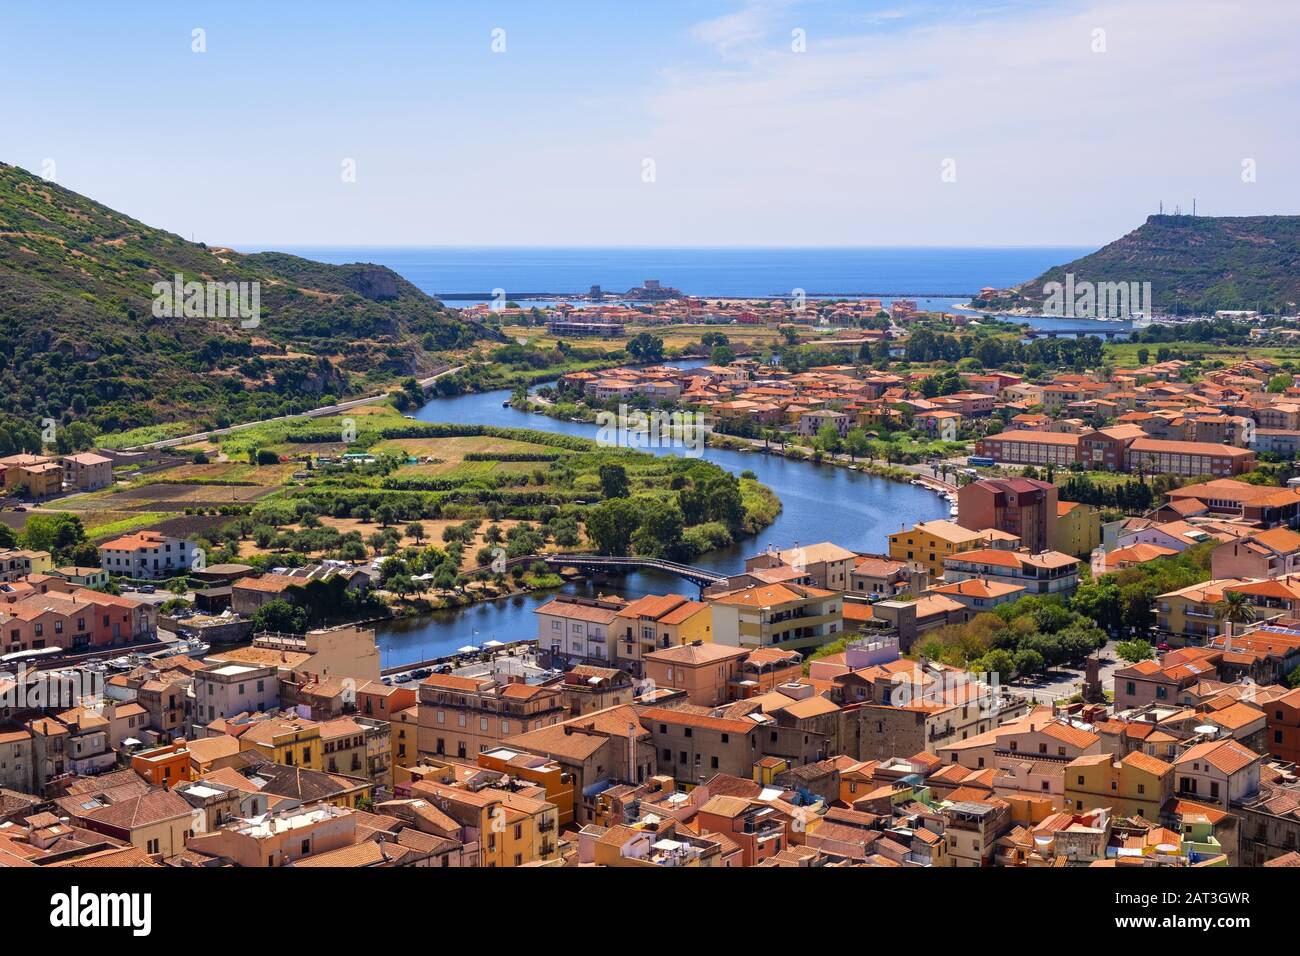 Bosa, Sardinia / Italy - 2018/08/13: Panoramic view of the town of Bosa by the Temo river with Bosa Marina resort at the Mediterranean sea coast seen from Malaspina Castle hill - known also as Castle of Serravalle Stock Photo